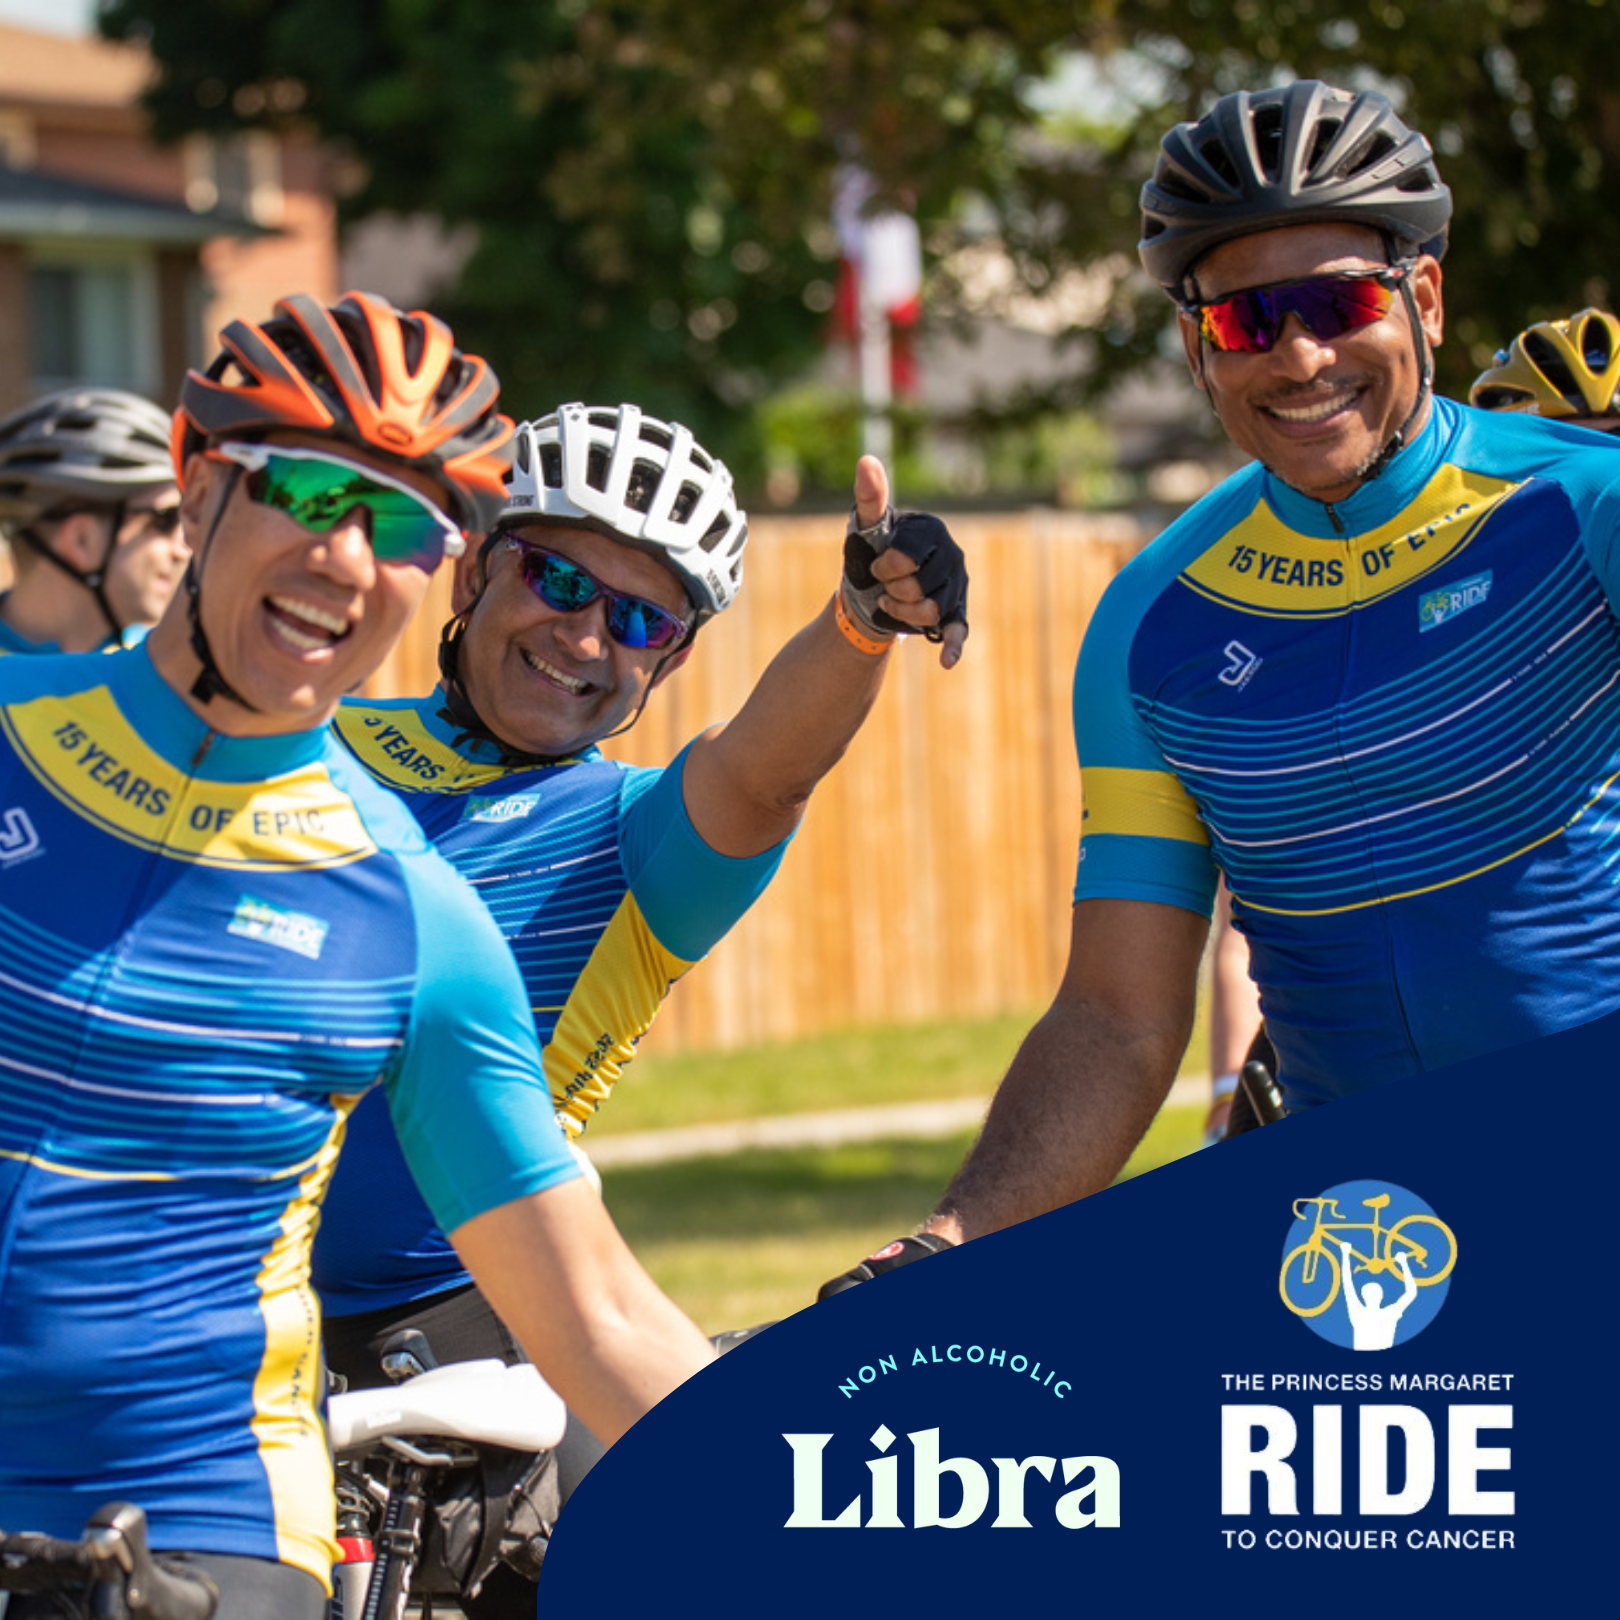 The Proud Official Non-Alc Sponsor Of The Ride To Conquer Cancer